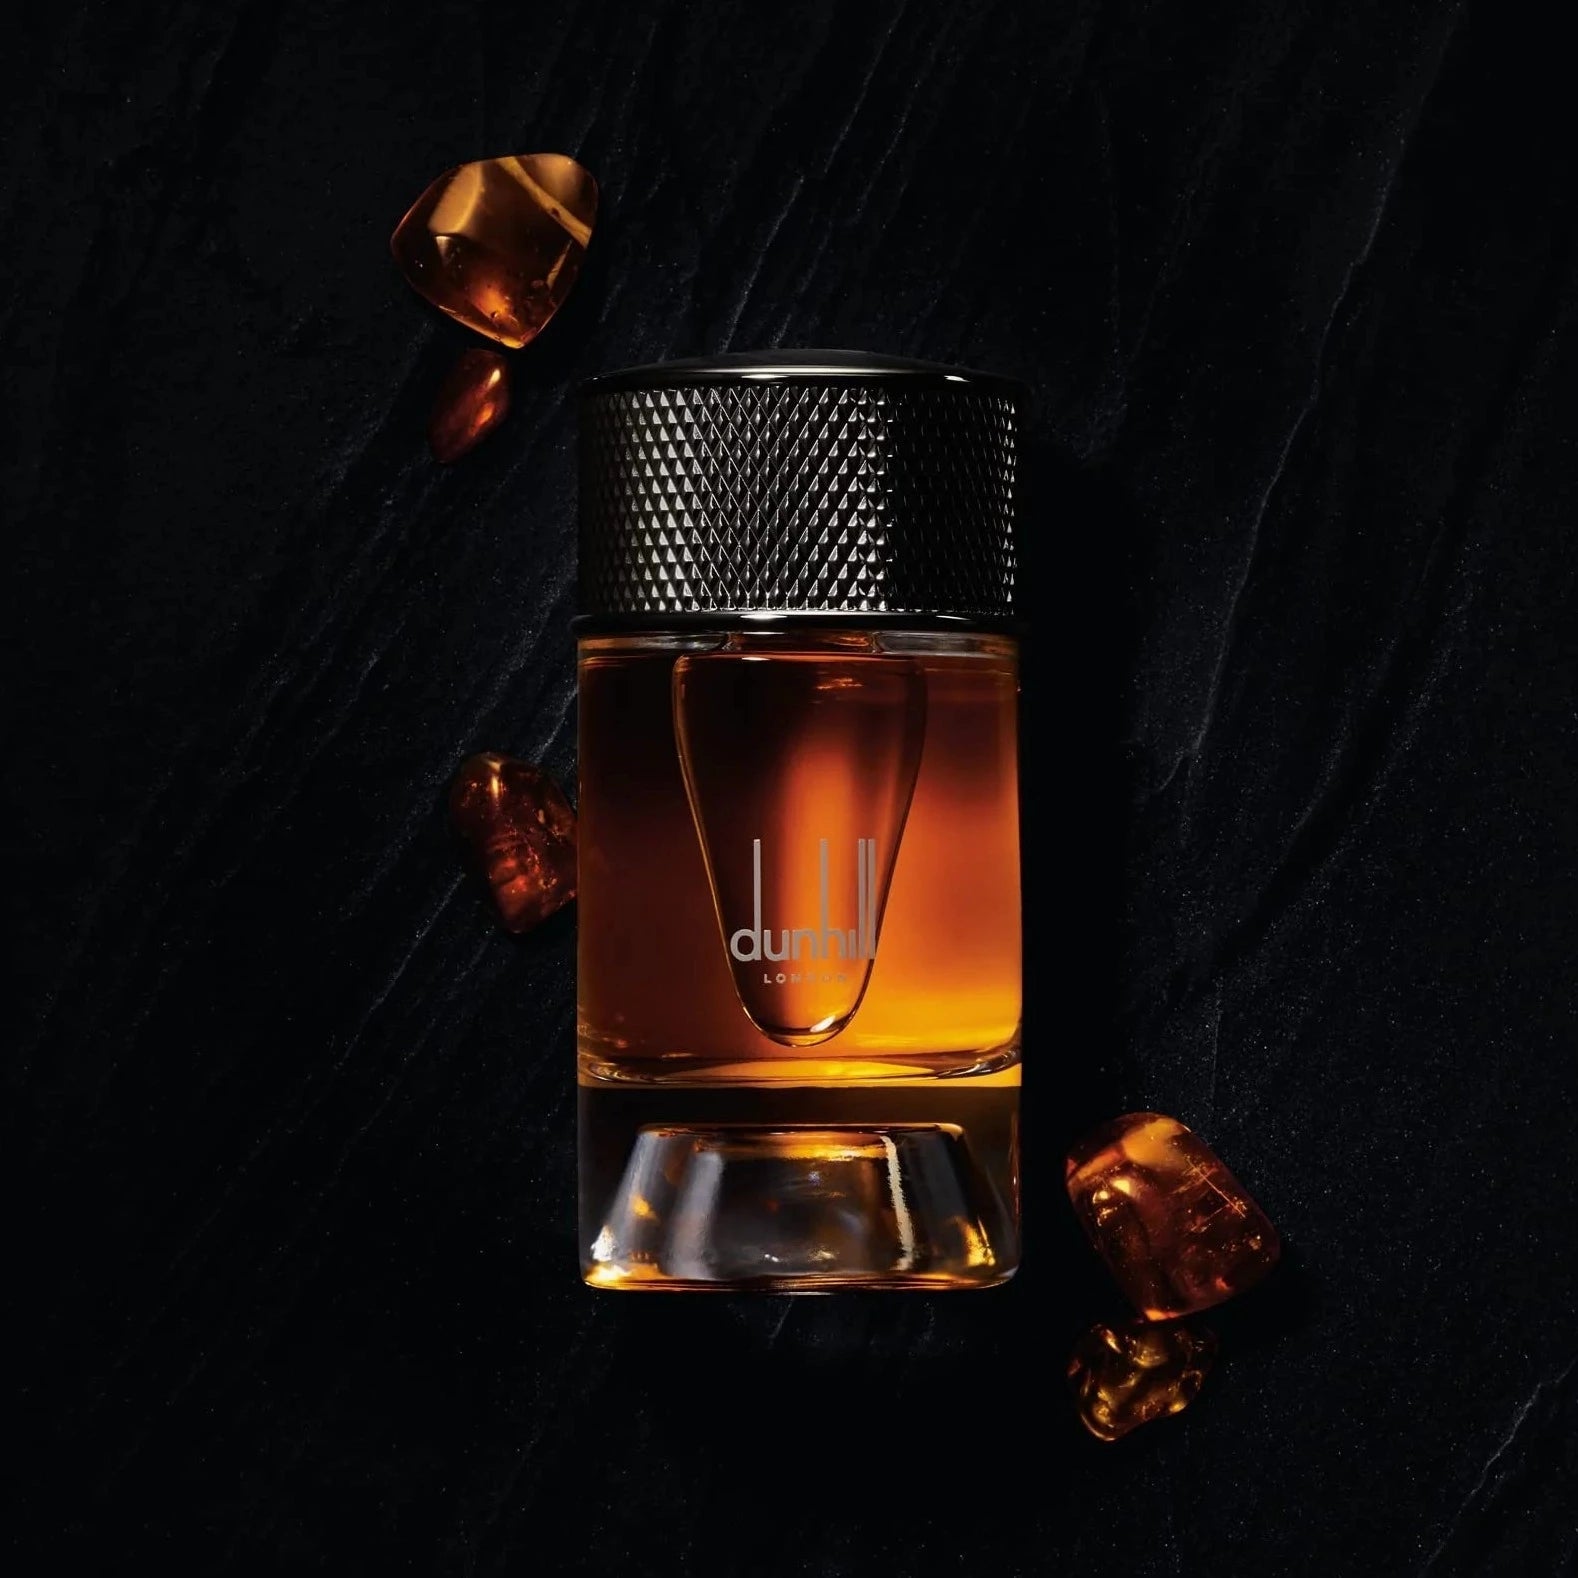 Dunhill Signature Collection Moroccan Amber EDP | My Perfume Shop Australia